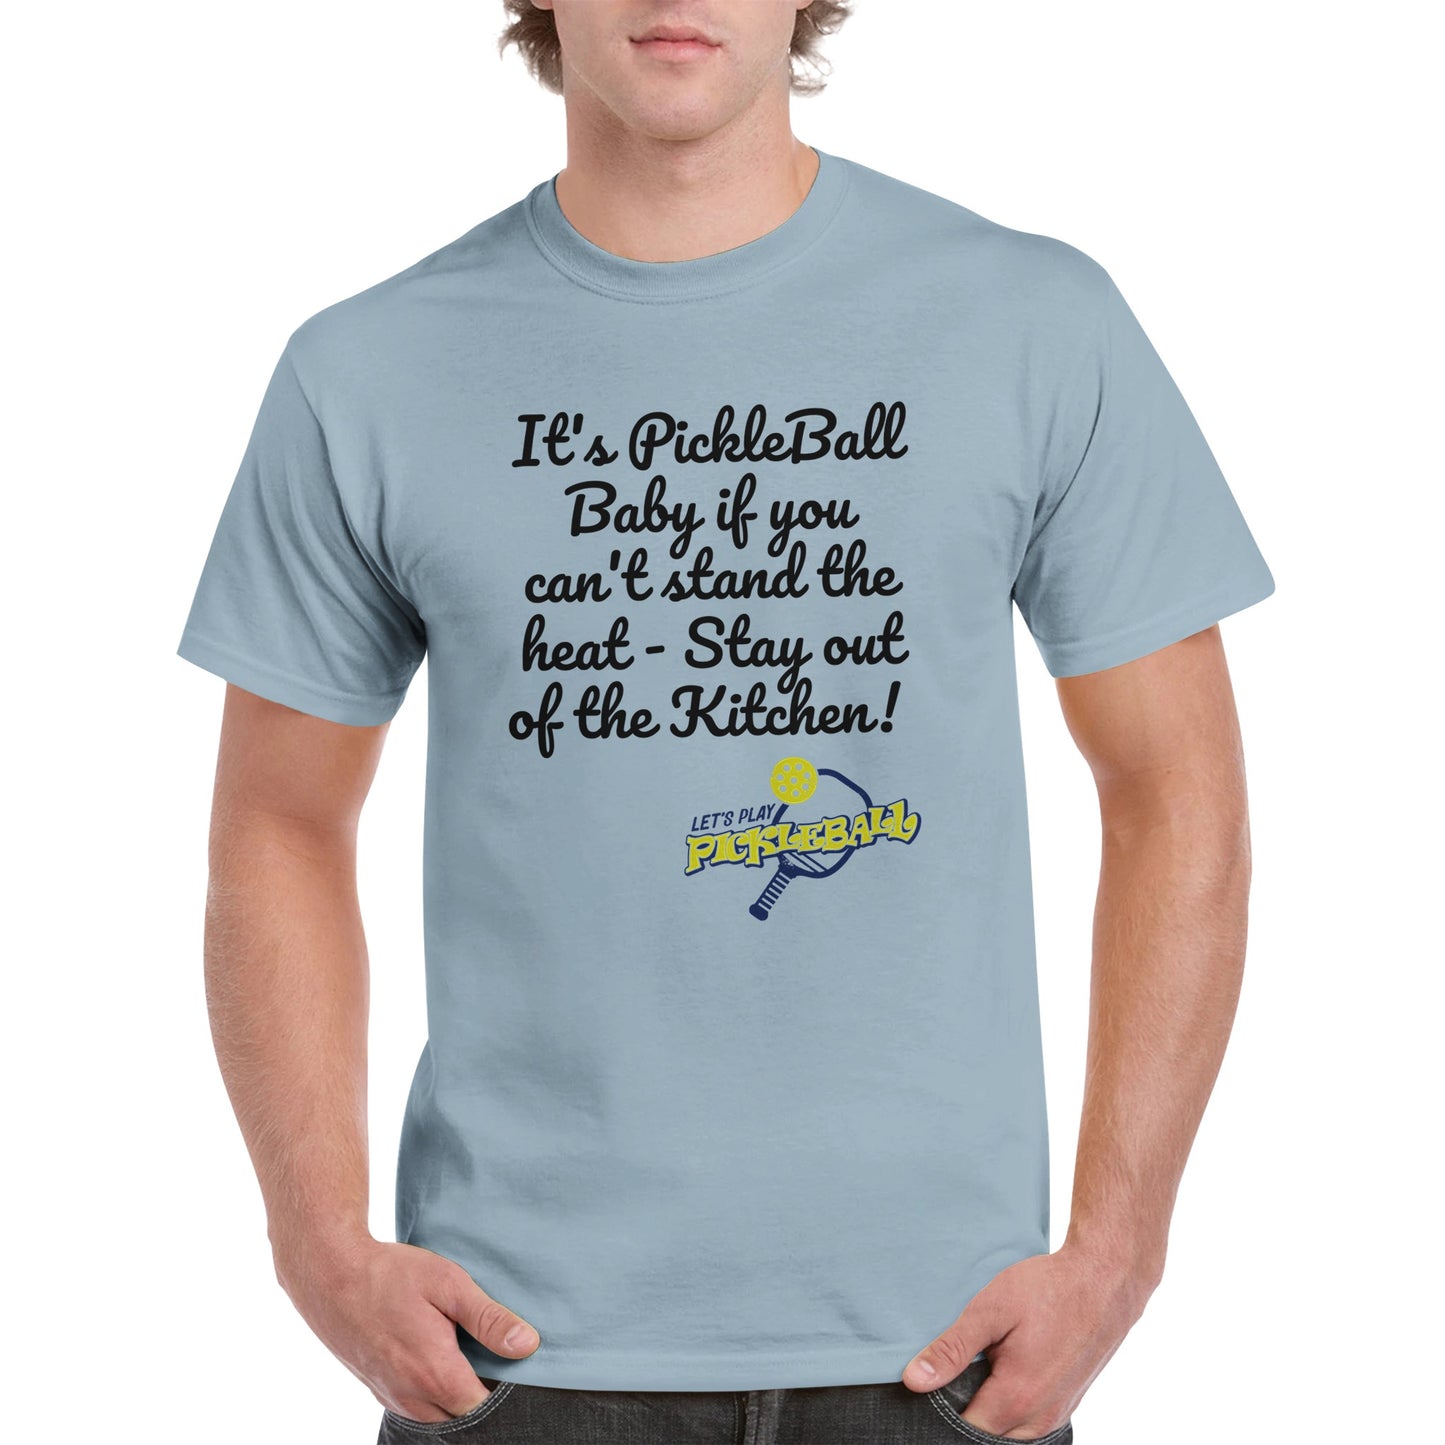 Light blue comfortable Unisex Crewneck heavyweight cotton t-shirt with funny saying It’s PickleBall Baby if can’t stand the heat – Stay out of the Kitchen!  and Let’s Play Pickleball logo on the front from WhatYa Say Apparel worn by blonde-haired male front view.